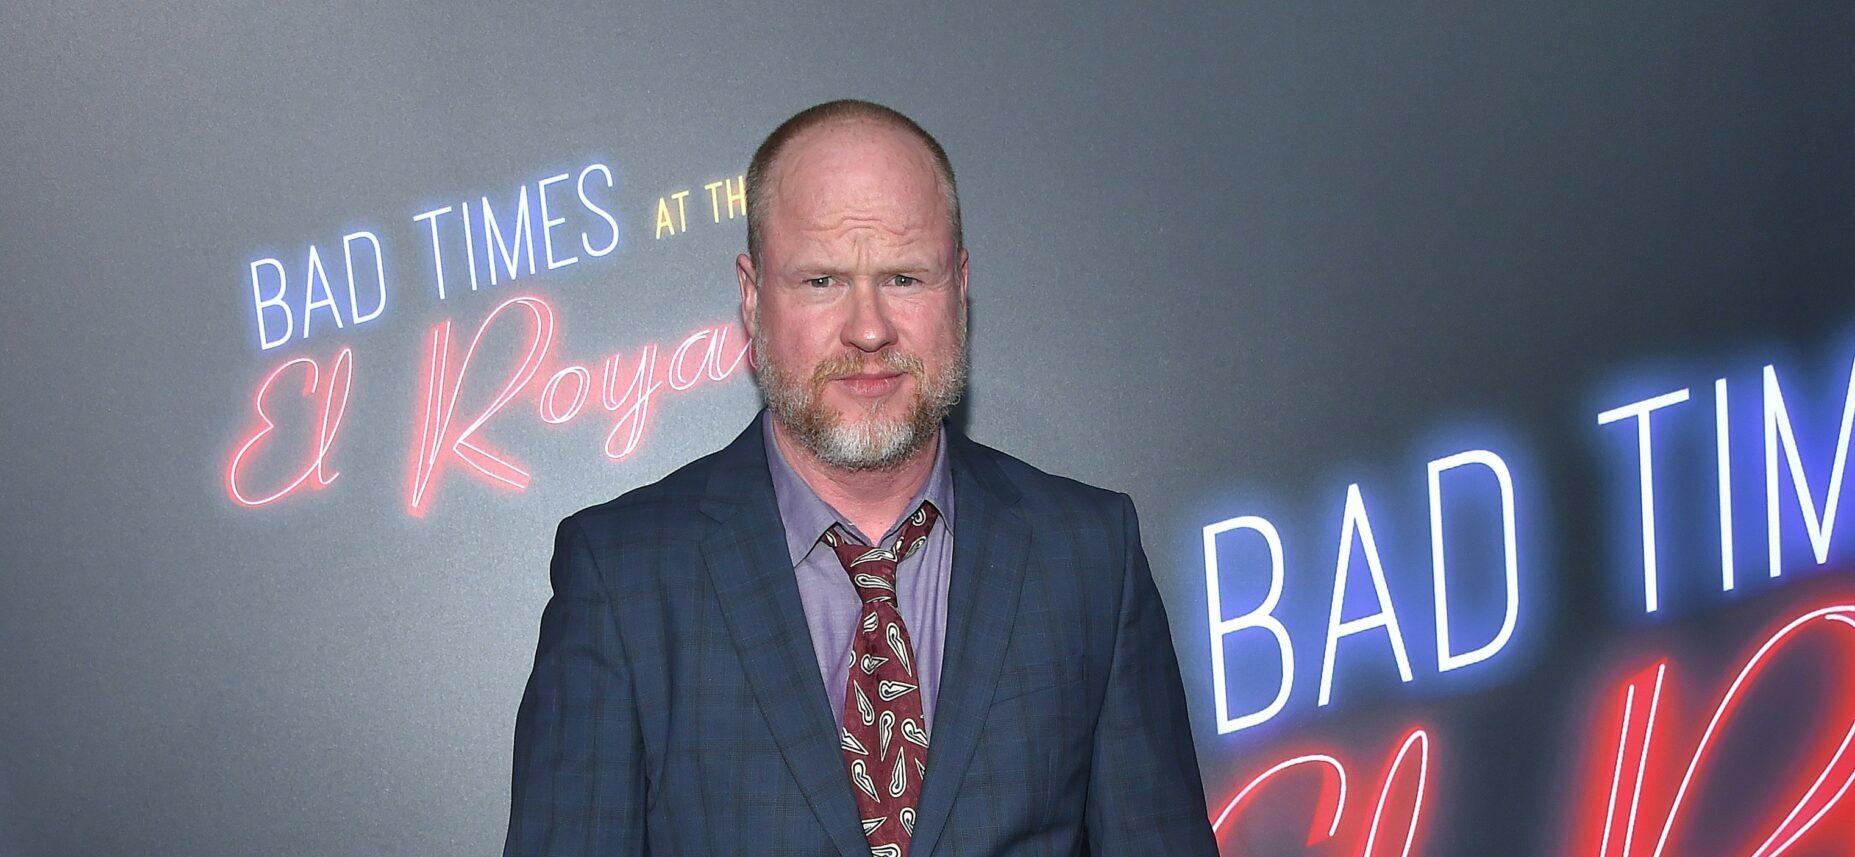 Joss Whedon at the 'Bad Times at the El Royale' Global Premiere